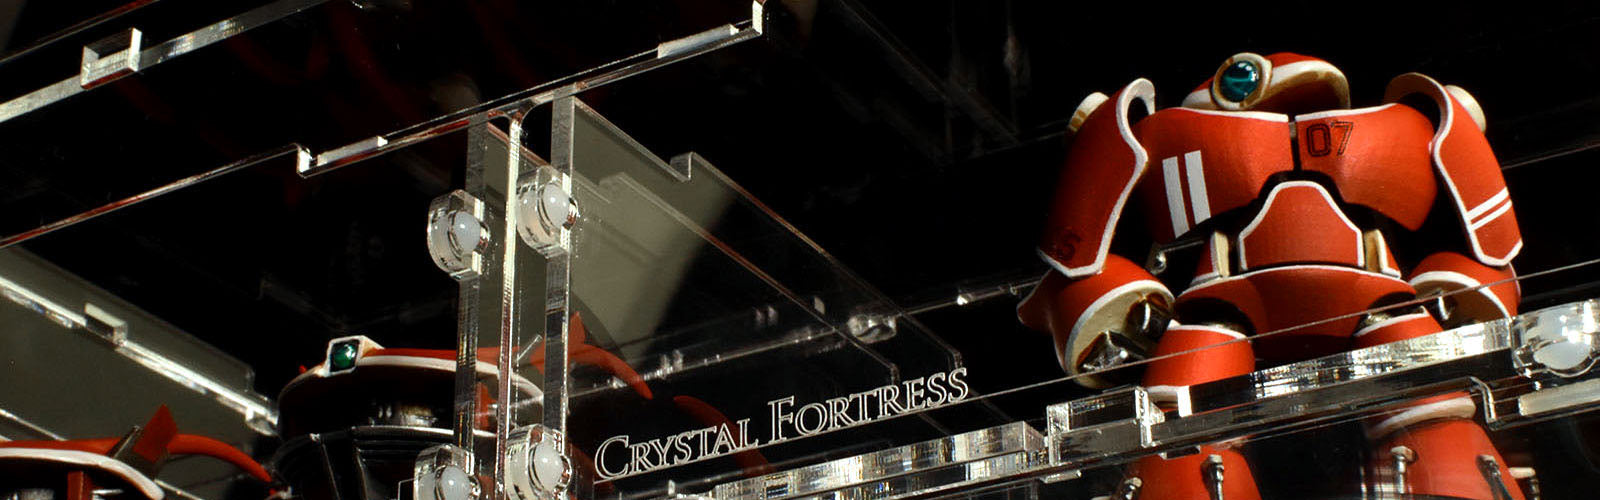 CRYSTAL FORTRESS GLUE - Crystal Fortress